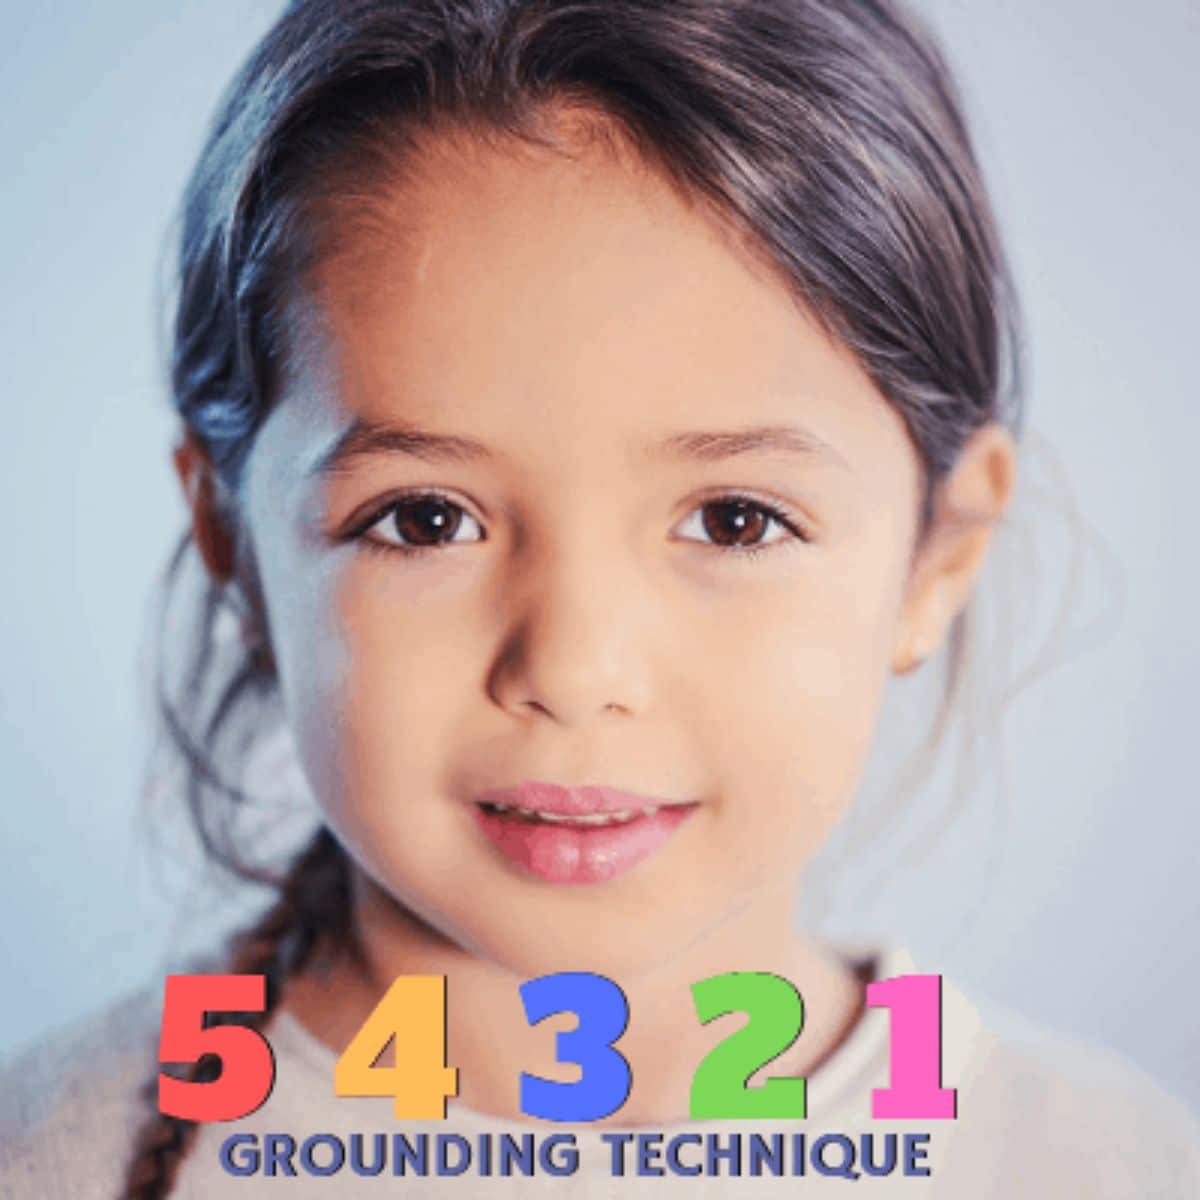 The text reads "54321 Grounding technique". The image is of a girl with black hair looking at the camera